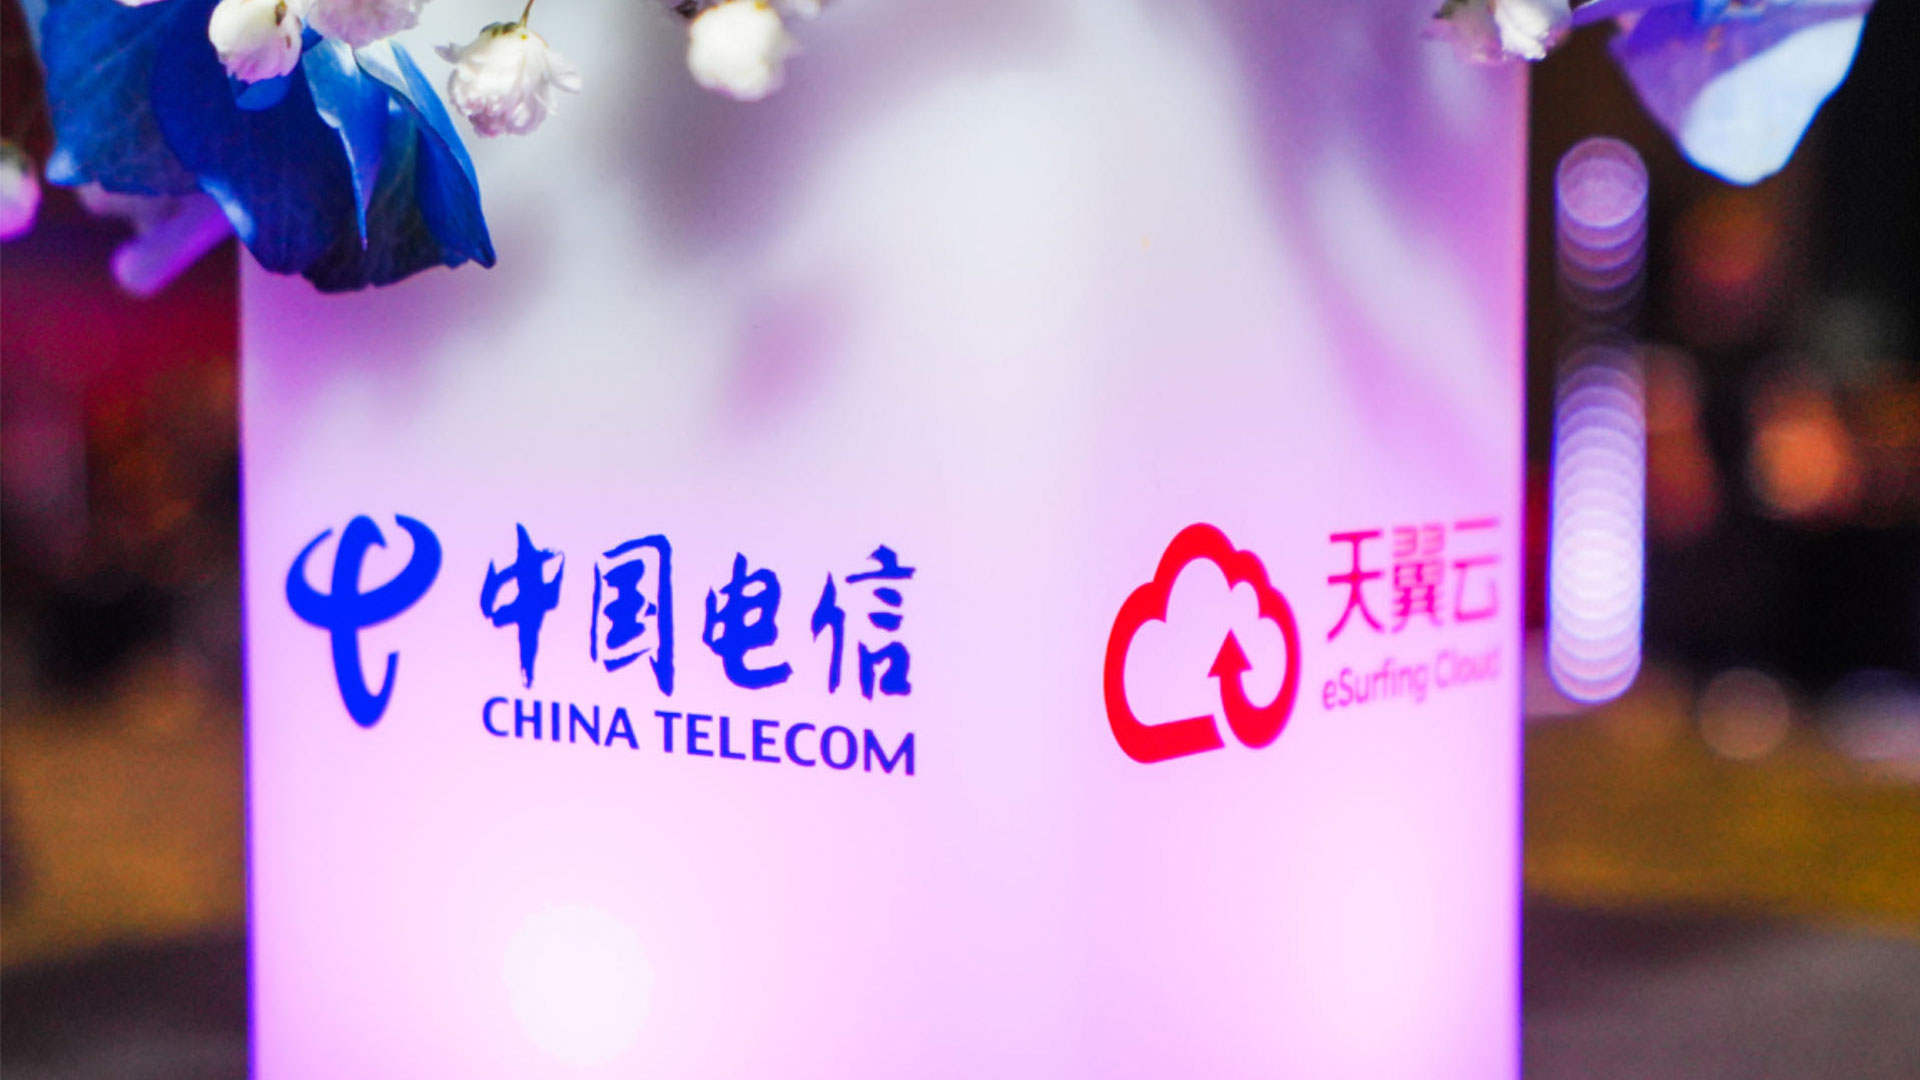 China Telecom Spring Kickoff Event_by D2 Studio Event & Marketing Agency_8